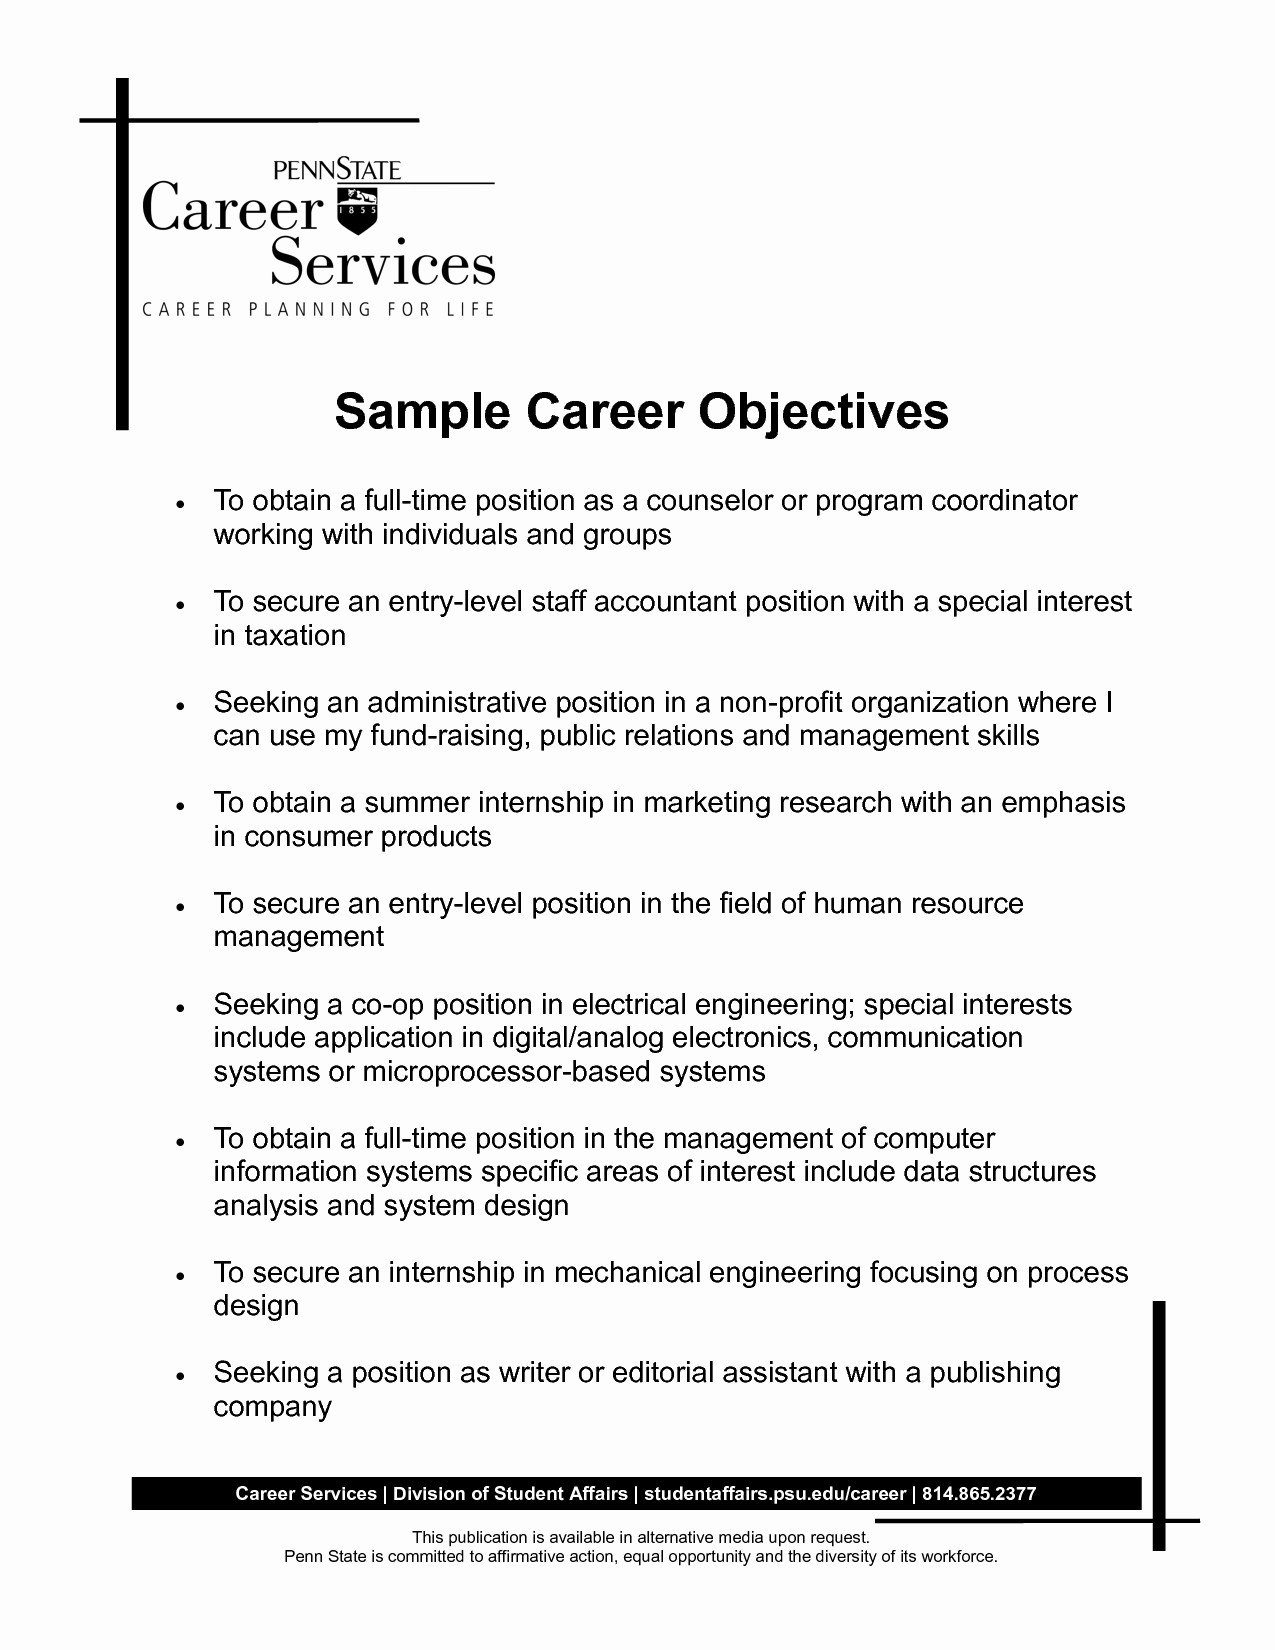 How to Write Career Objective with Sample